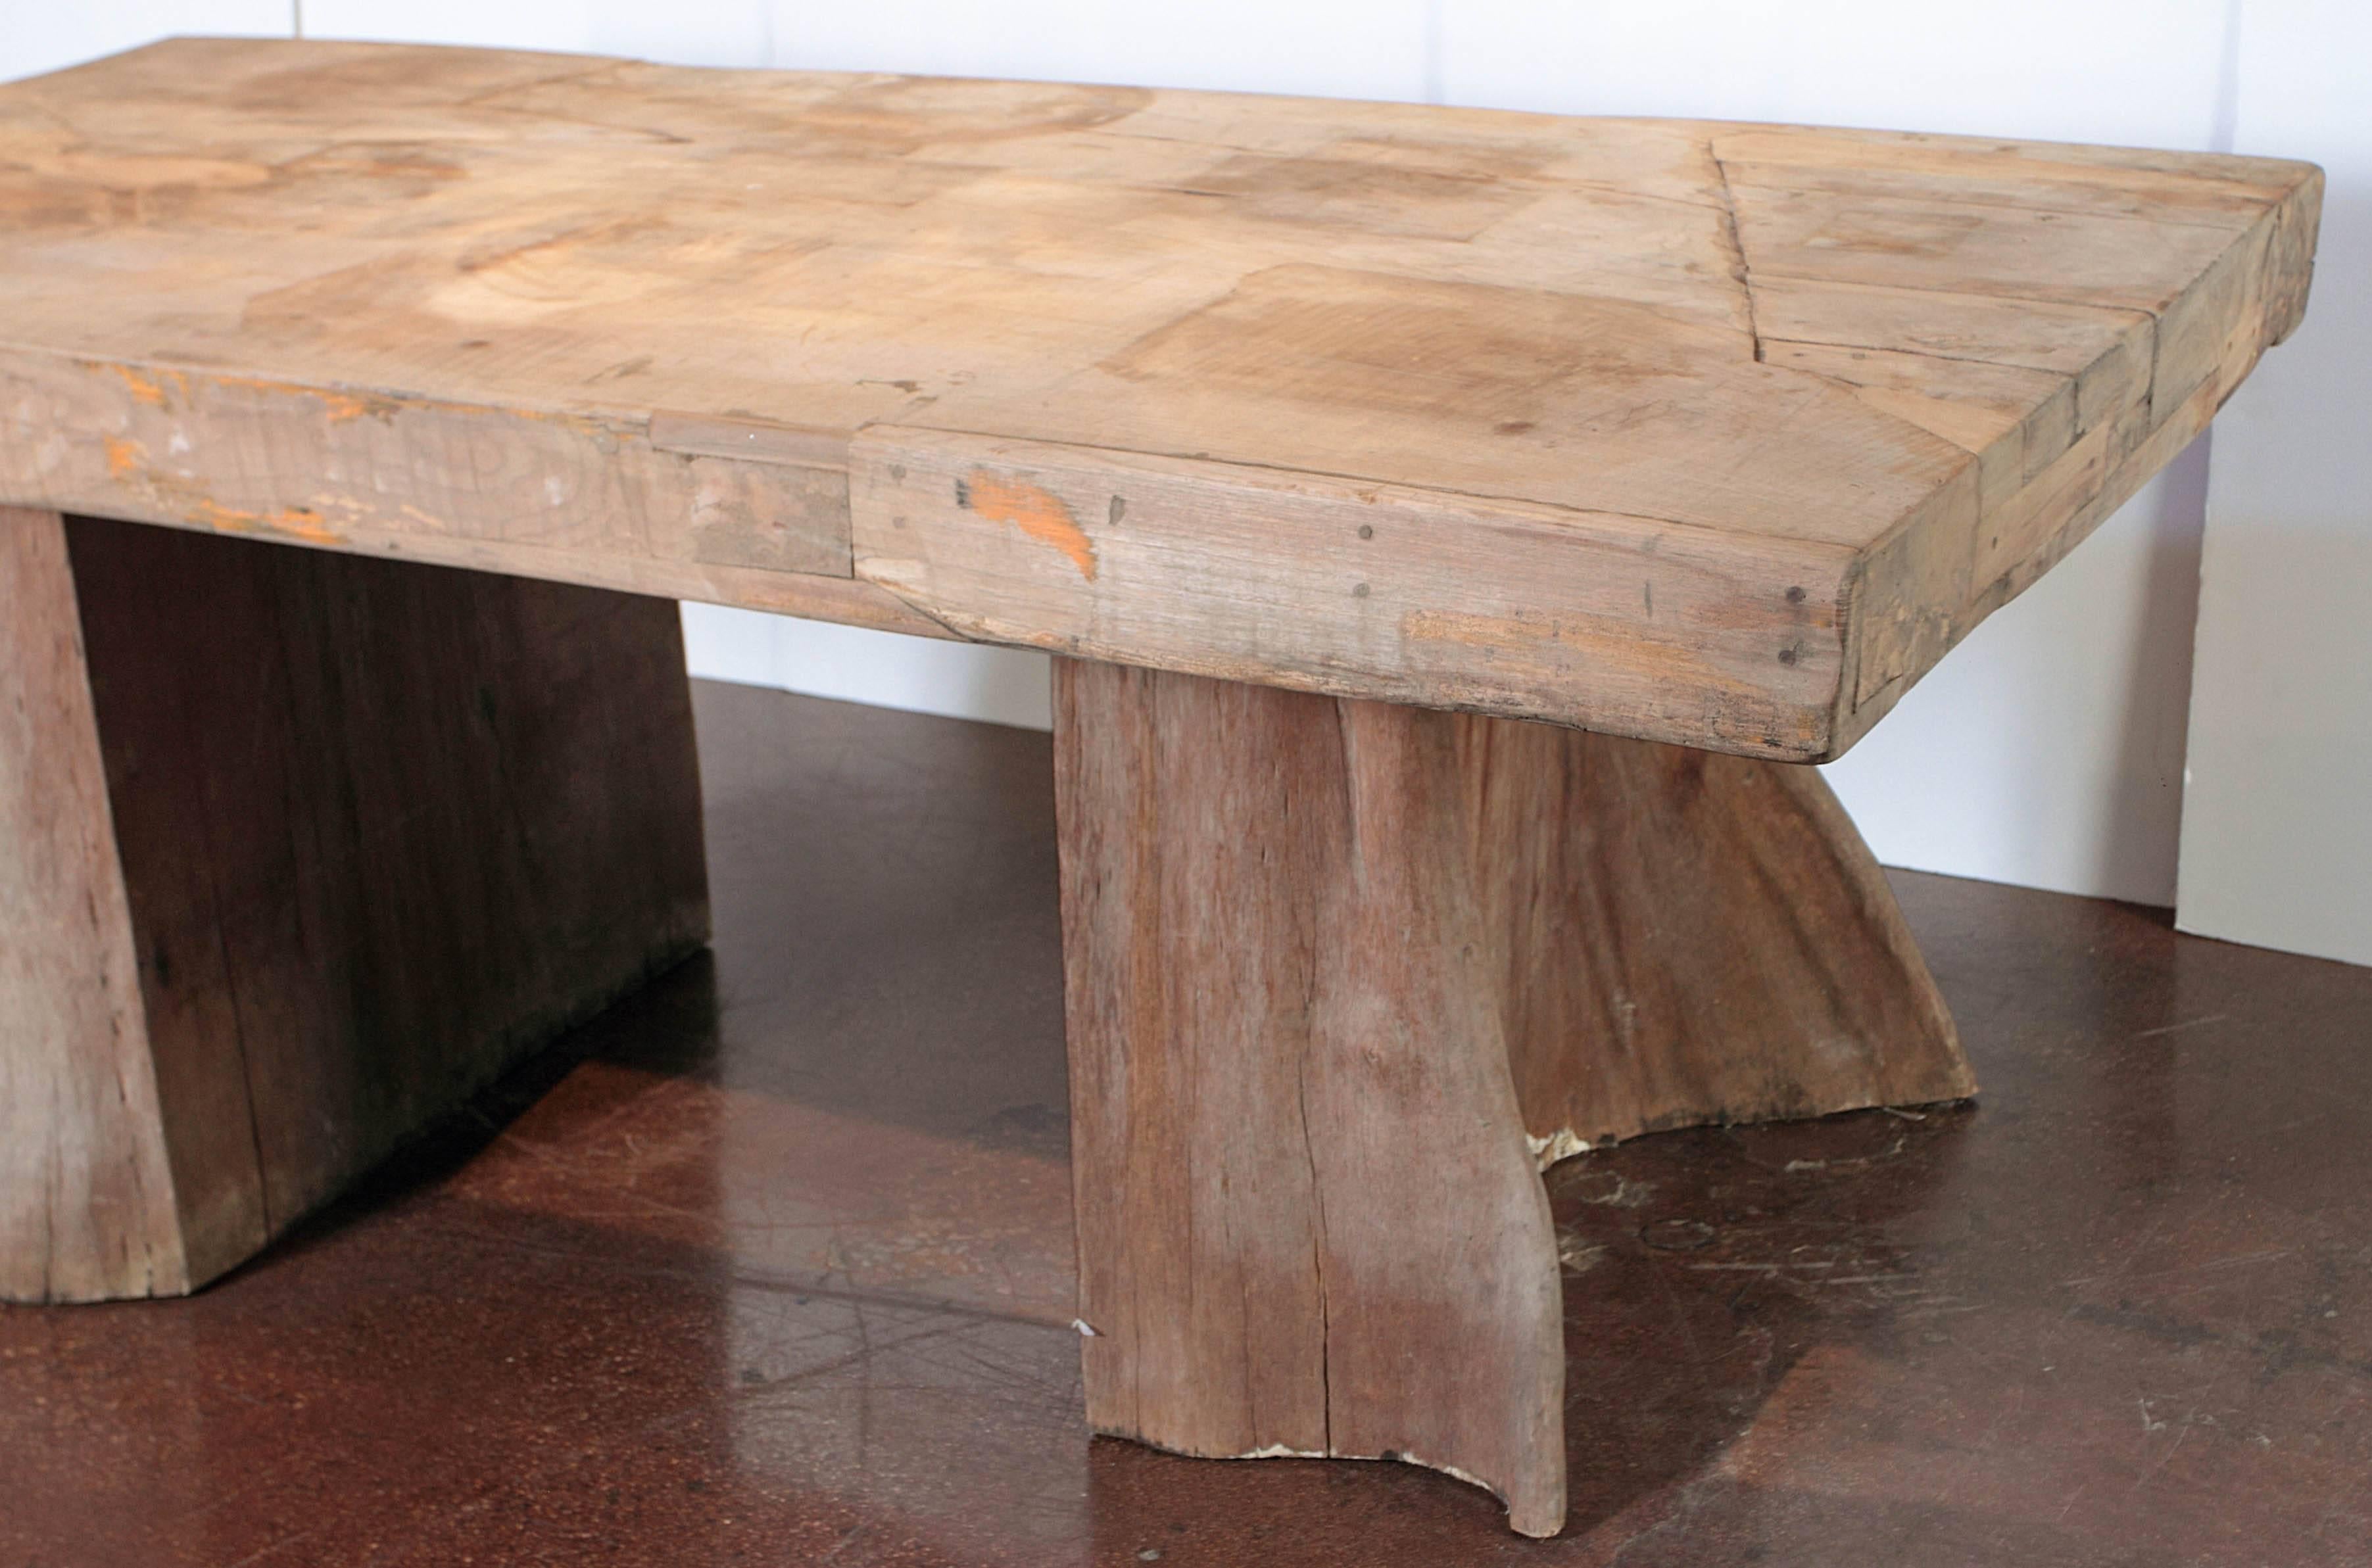 Slab Top Teak Dining Table with Organic Base Supports 2